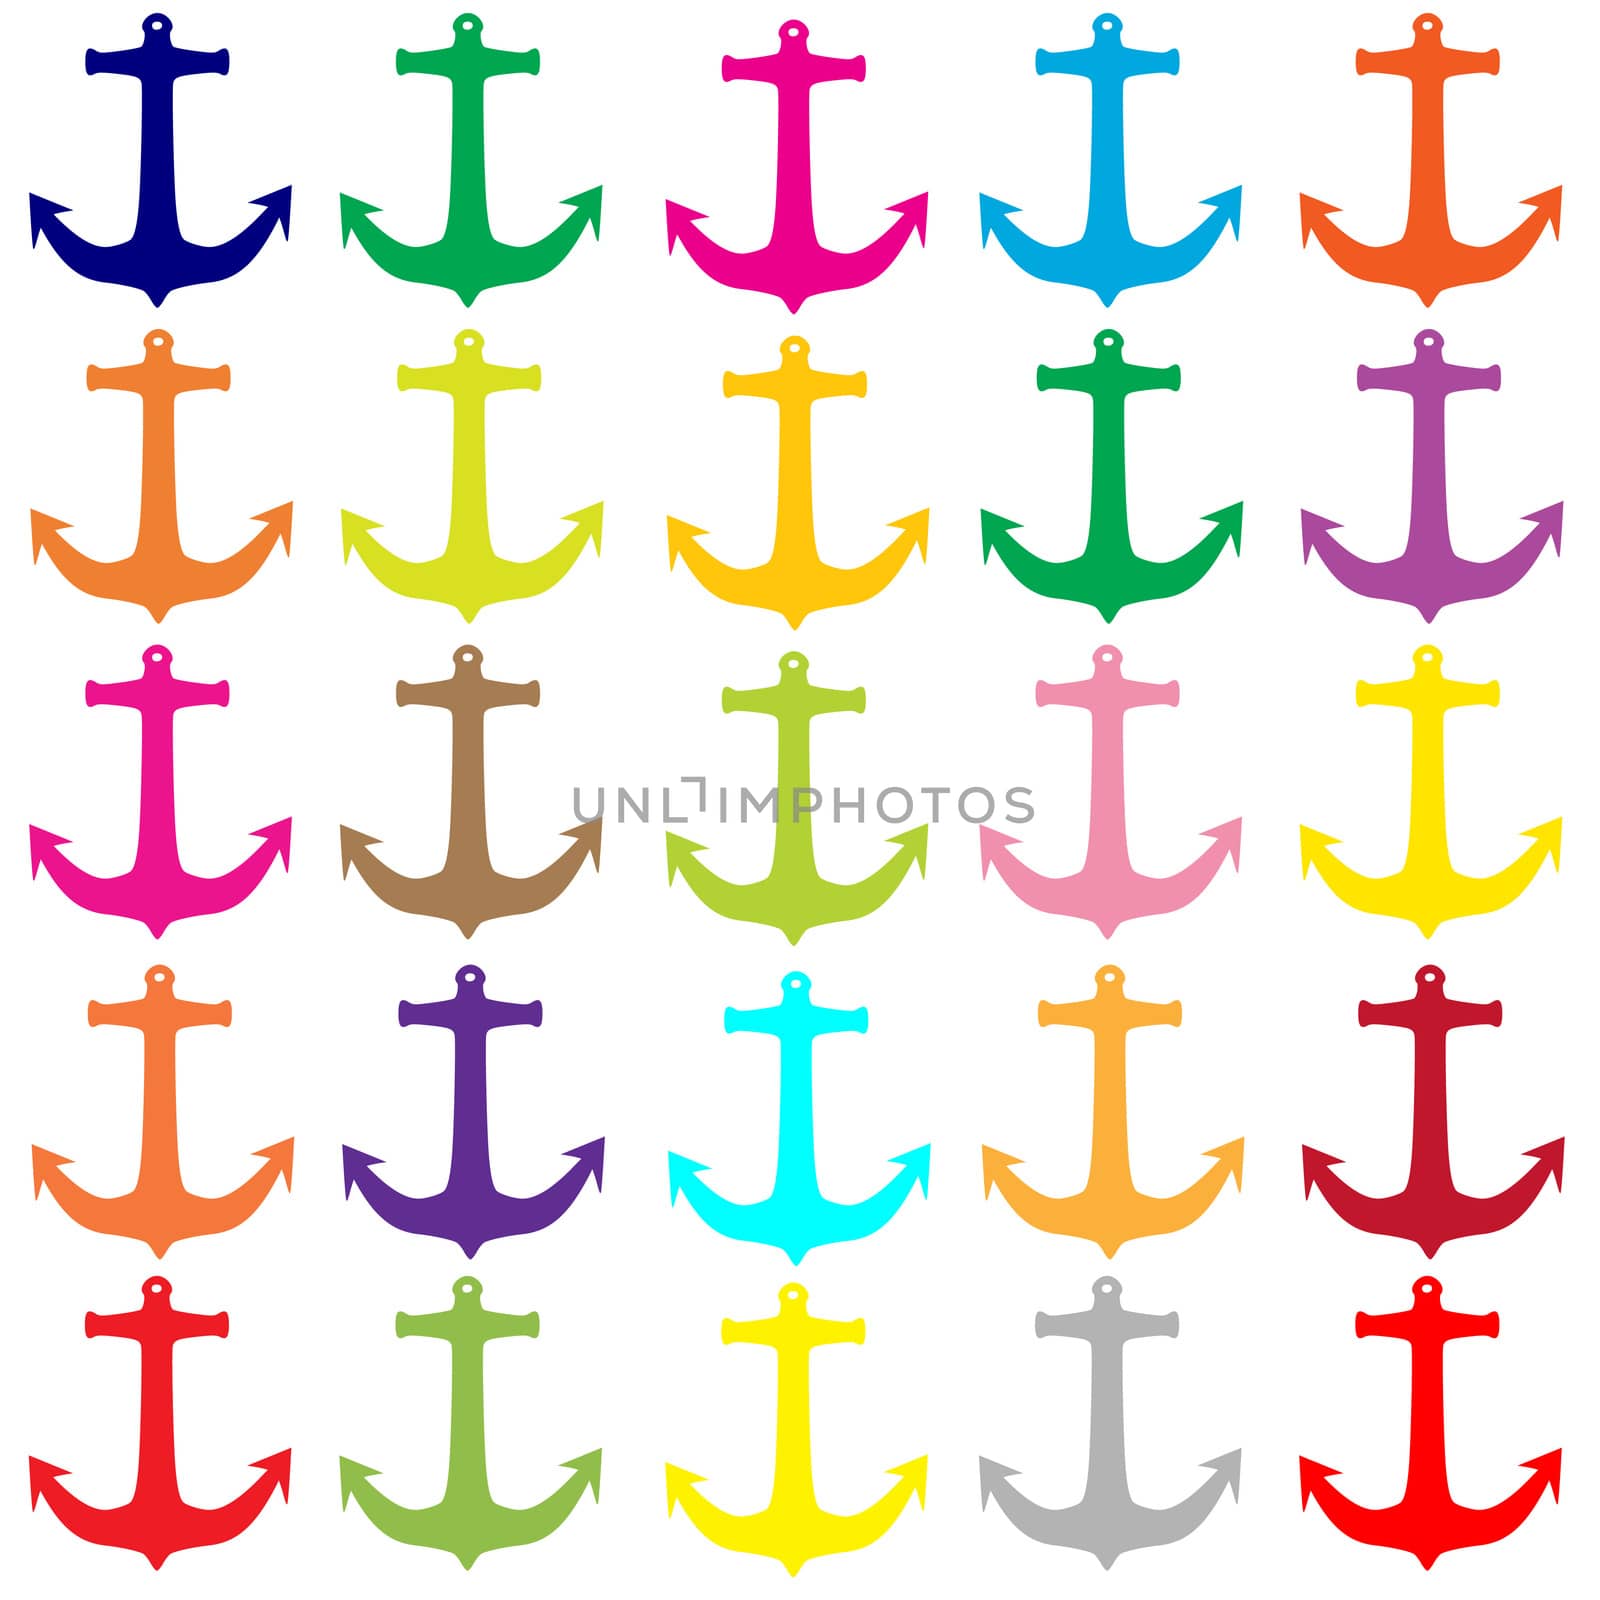 A pattern of anchors in different colors.